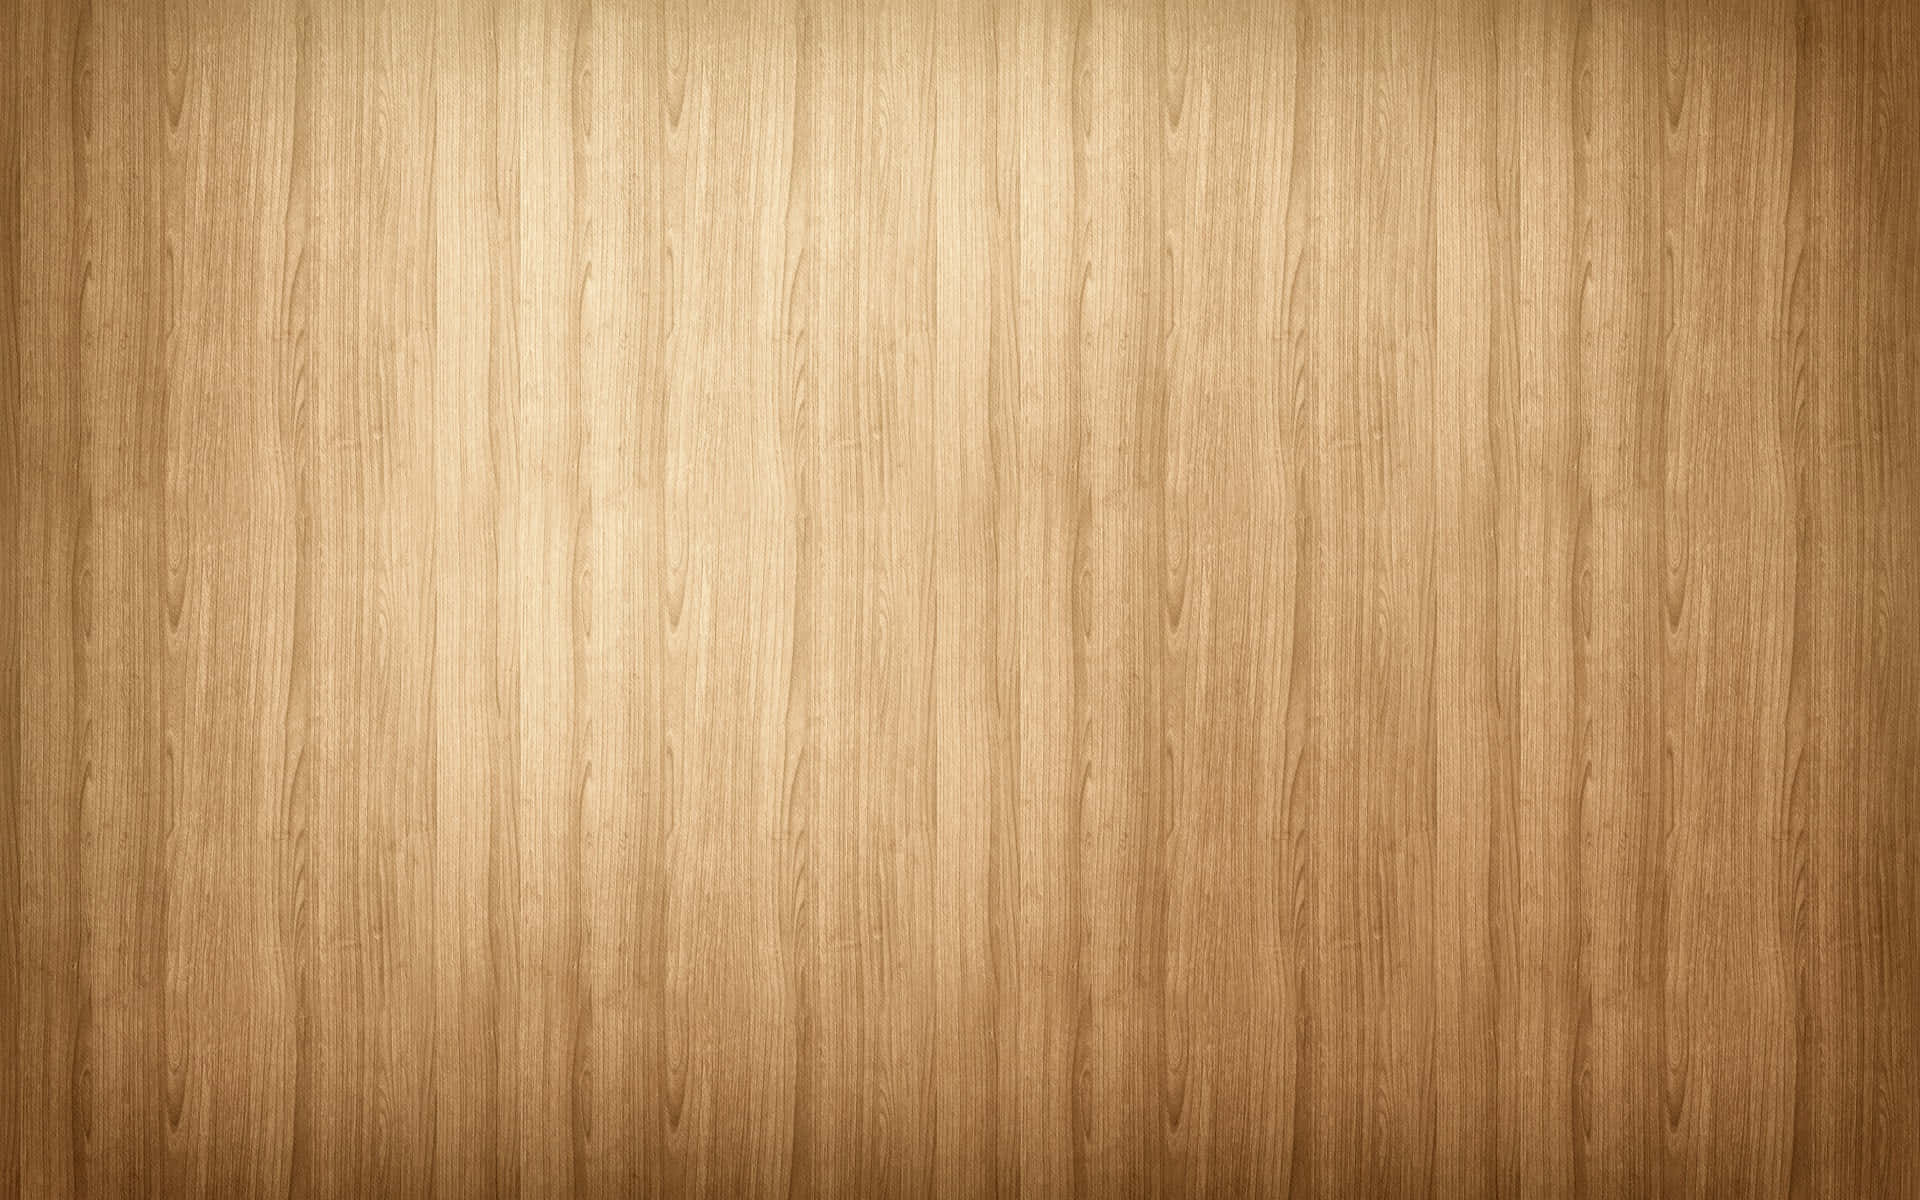 Brightly lit, light wood background with etched details